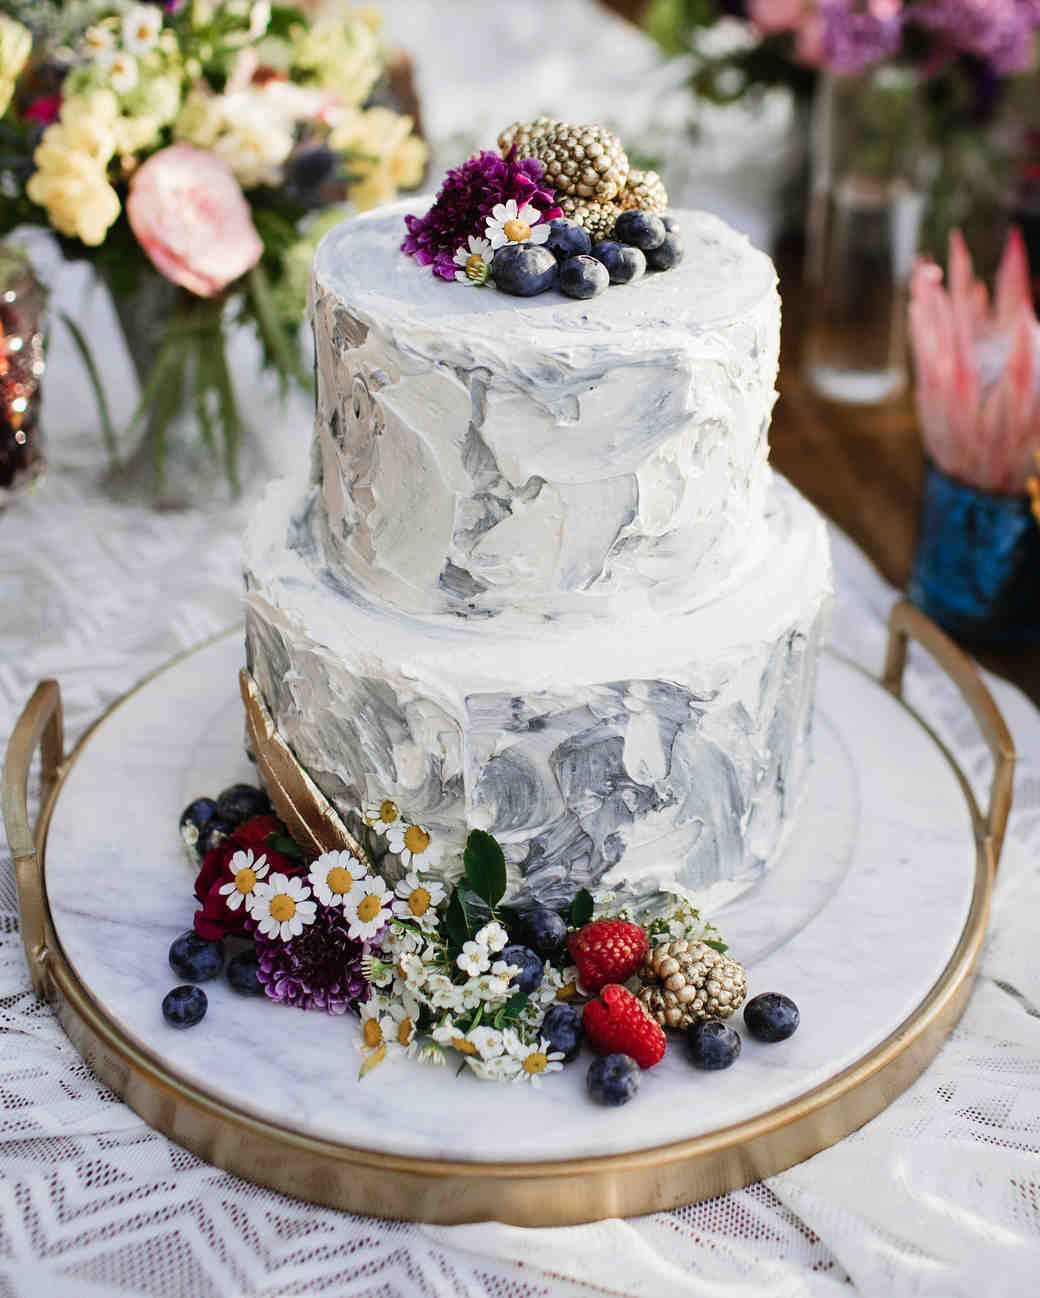 Wedding Cake Design
 25 Wedding Cake Design Ideas That ll Wow Your Guests